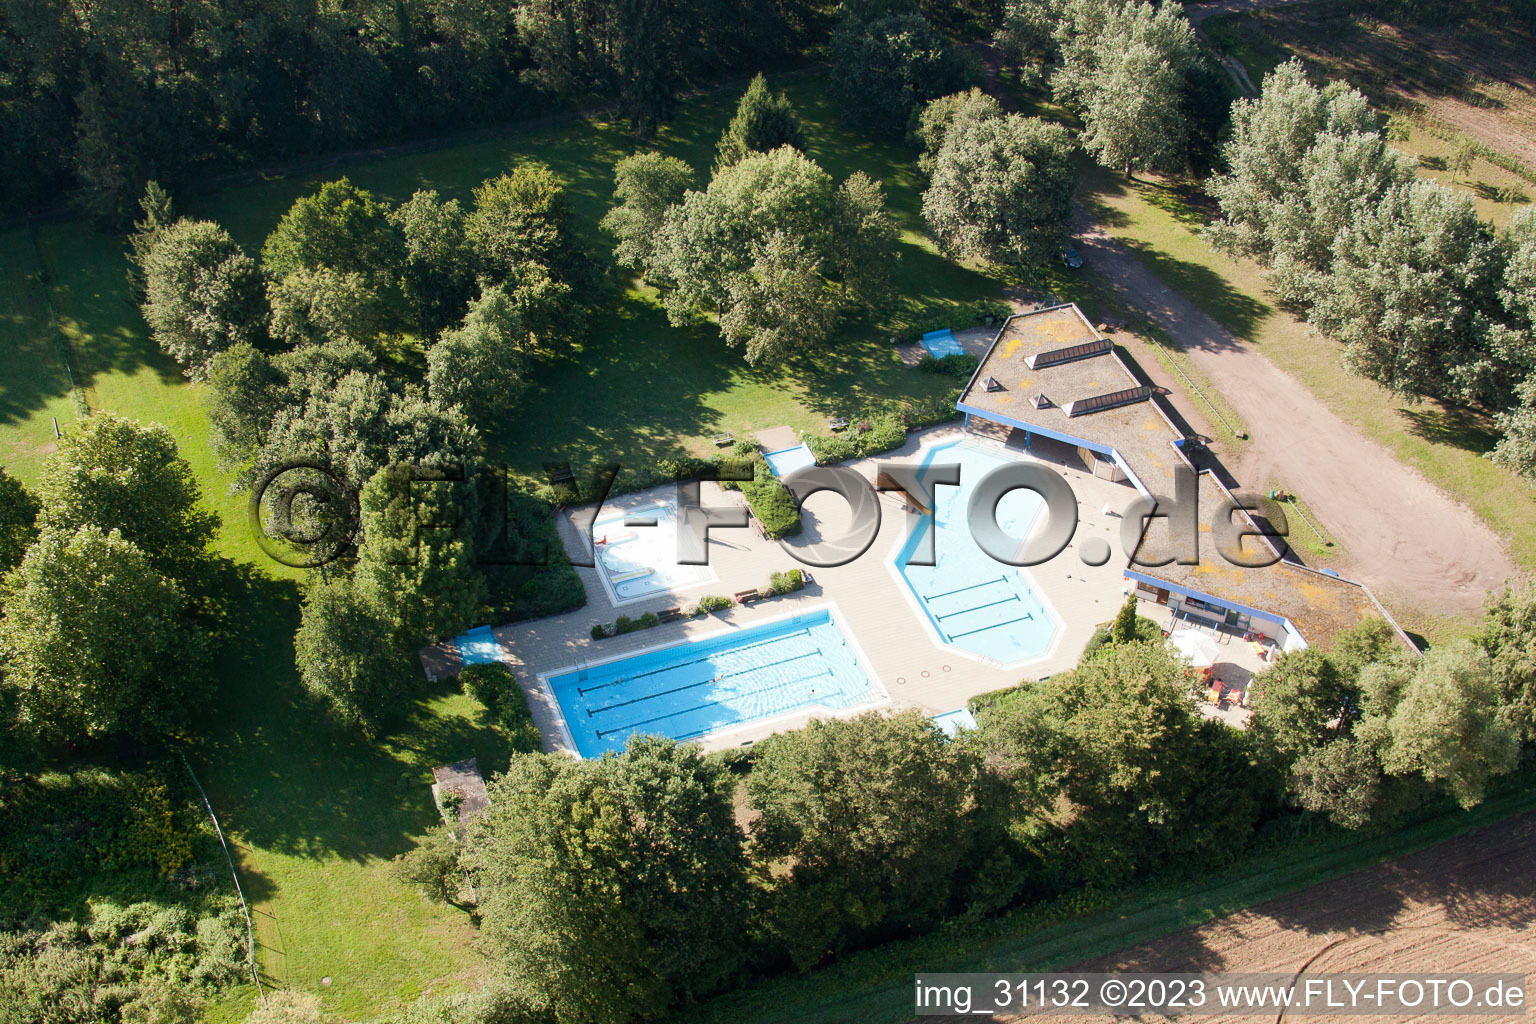 Aerial view of Outdoor pool in Steinfeld in the state Rhineland-Palatinate, Germany